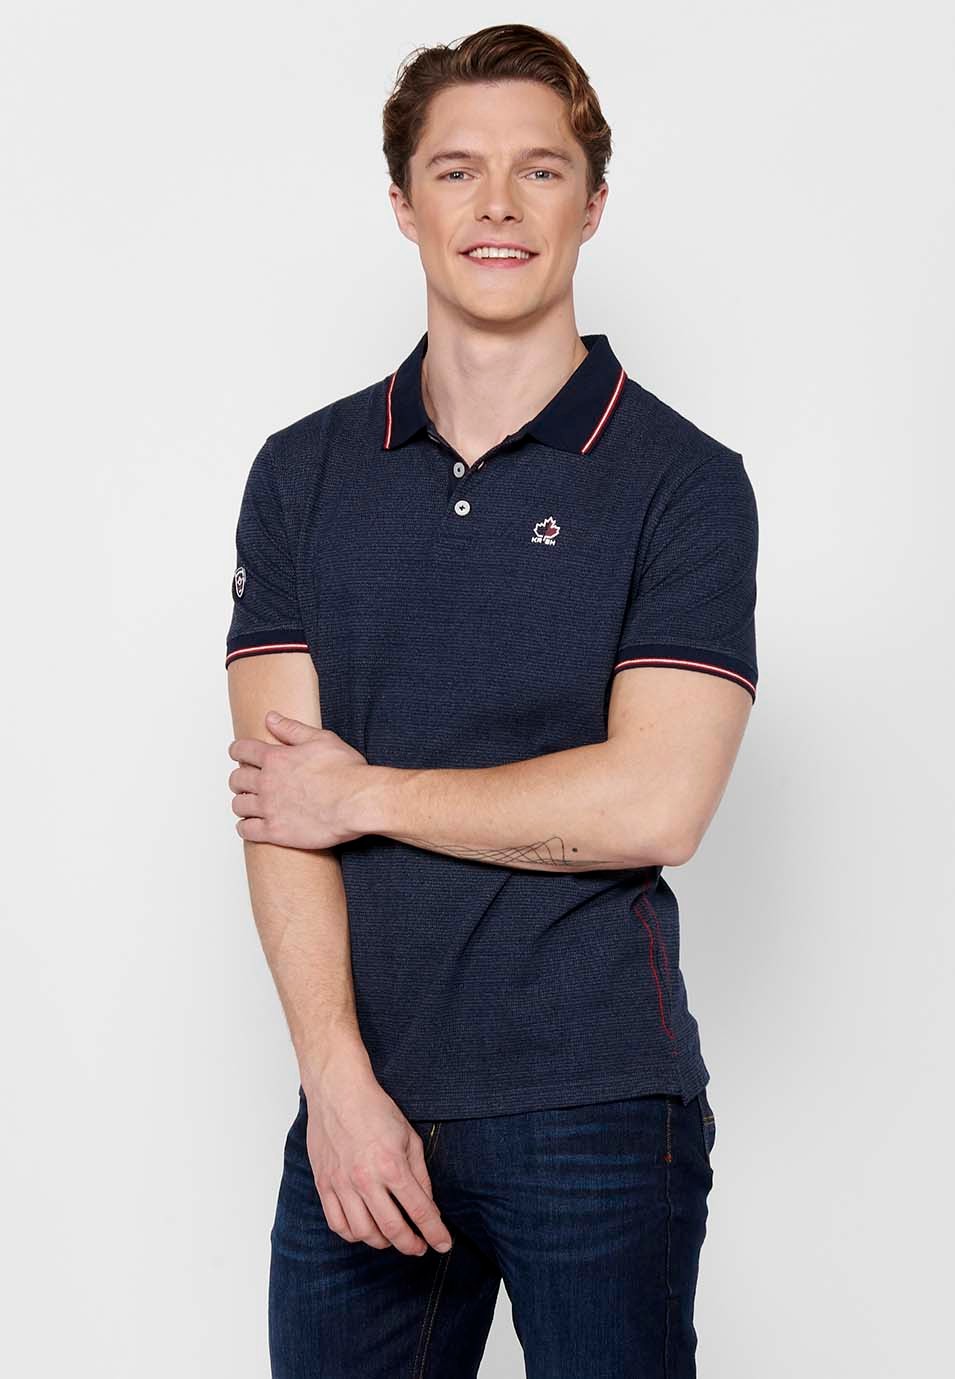 Short-sleeved polo shirt with shirt collar with buttons in Navy Color for Men 7